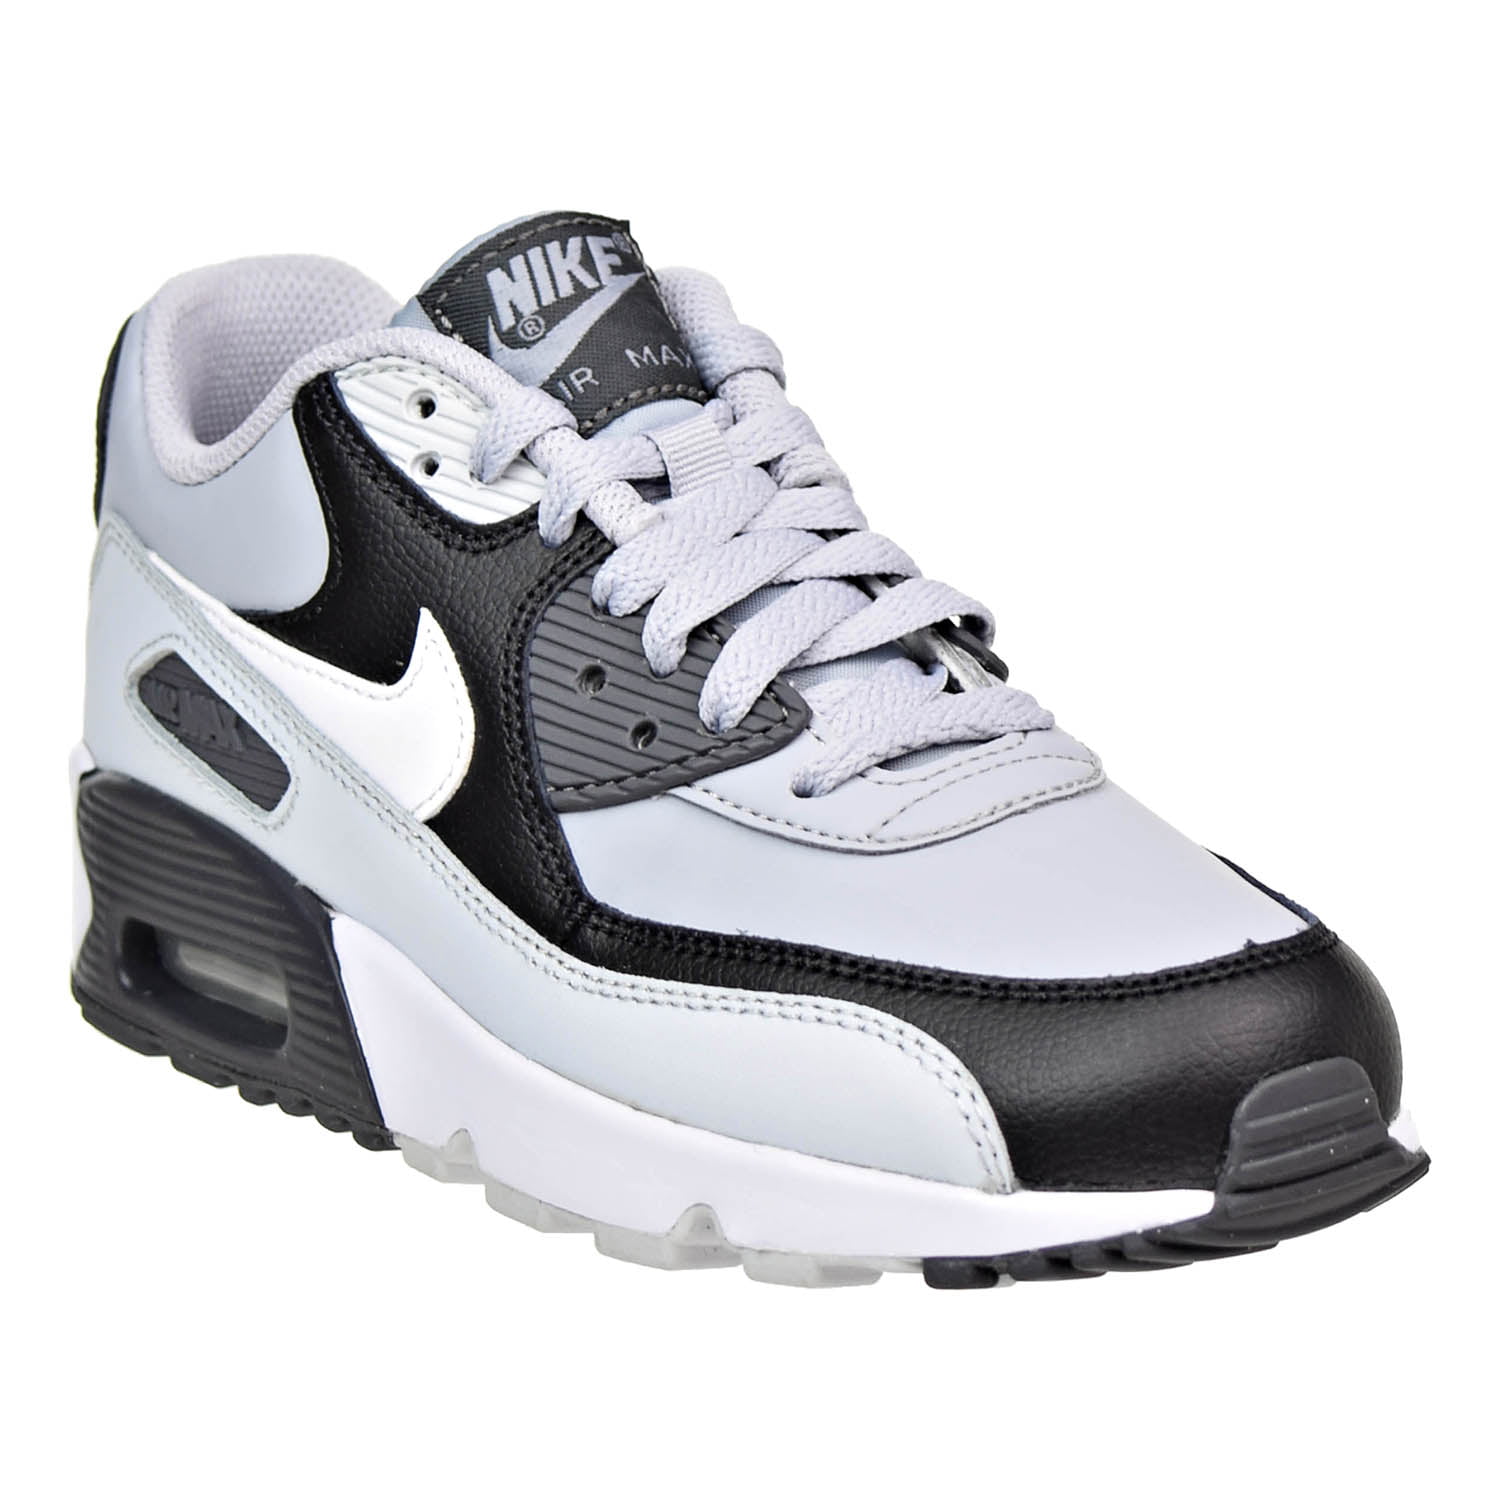 Nike Air max 90 Leather (GS) Big Kids Shoes Wolf Grey/White 833412-016